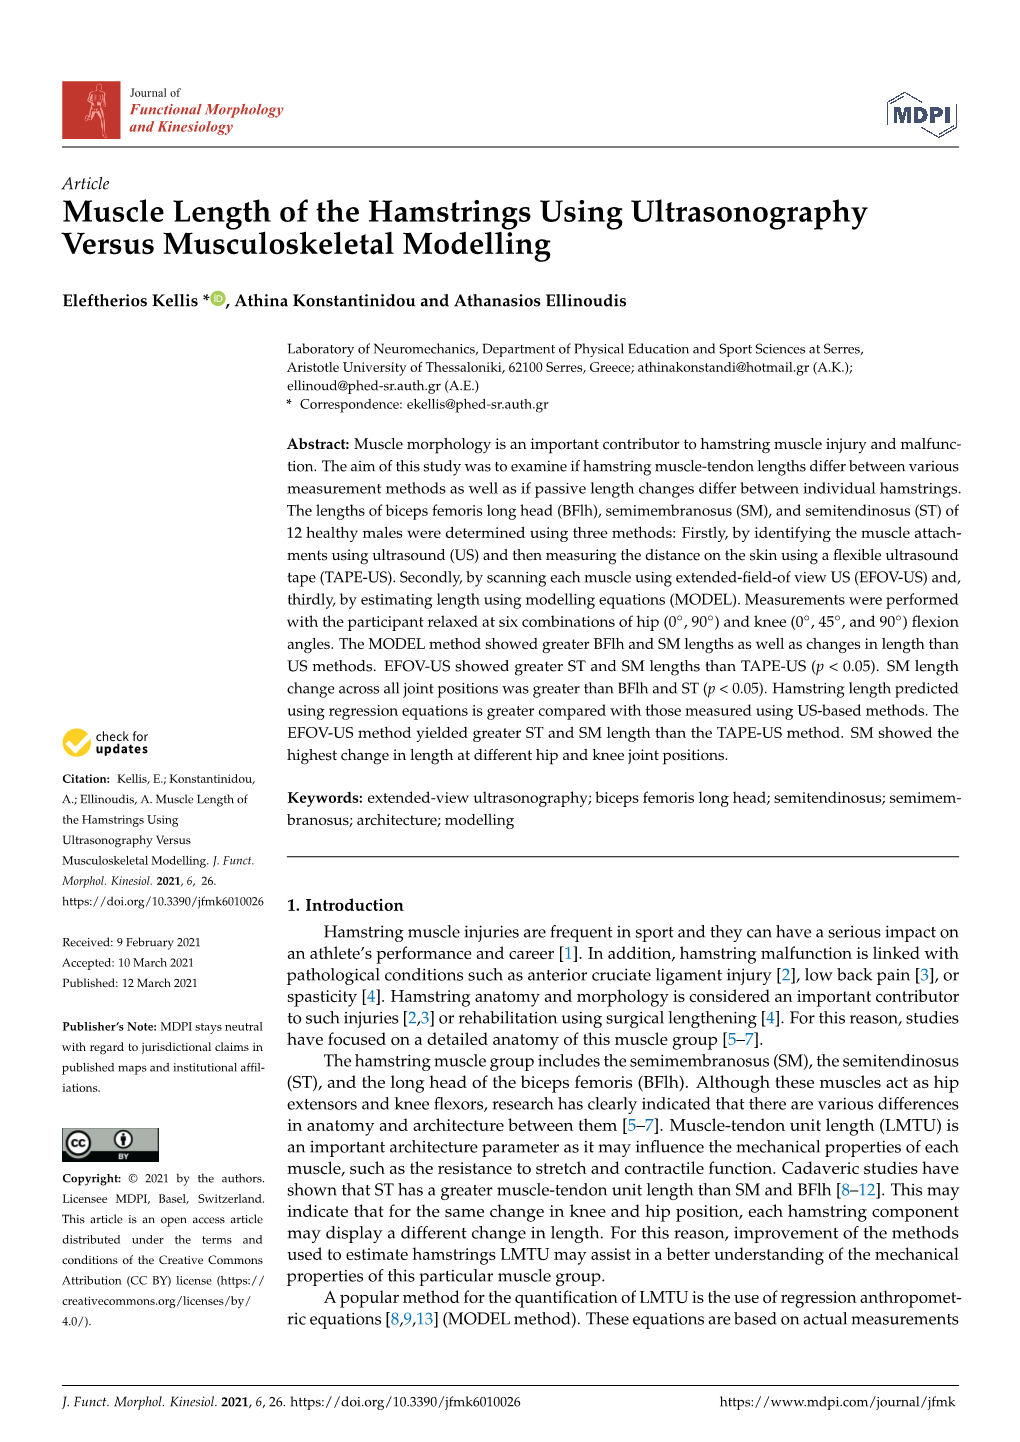 Muscle Length of the Hamstrings Using Ultrasonography Versus Musculoskeletal Modelling